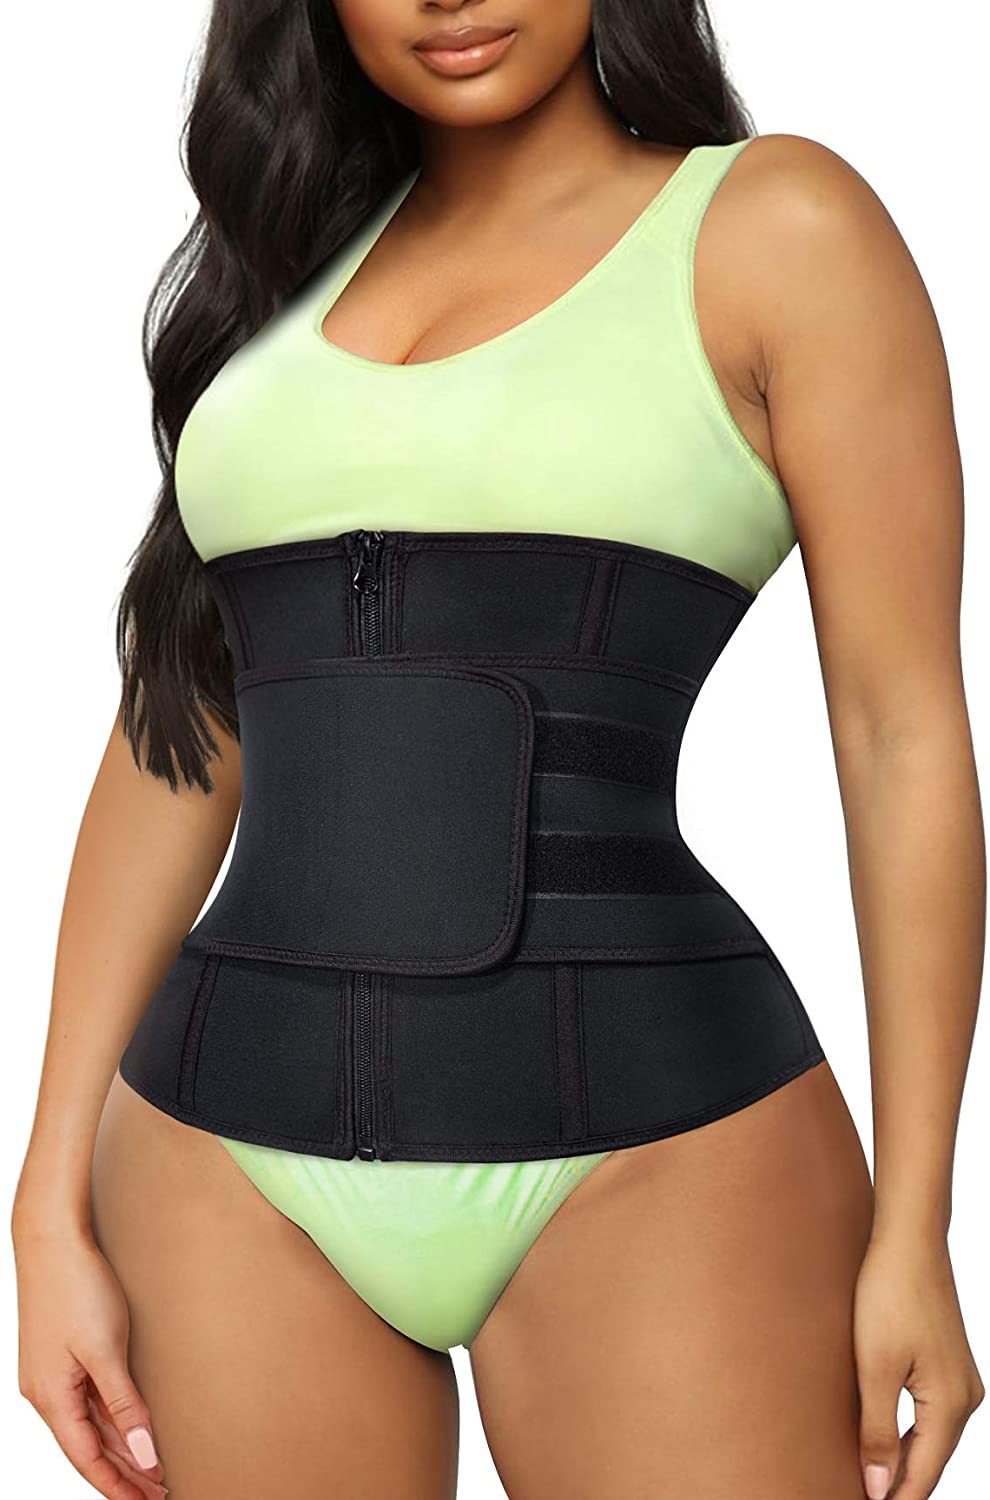 LAZAWG Women Waist Trainer Neoprene Belt Weight Loss Cincher Body Shaper  Tummy Control Strap Slimming Sweat Fat Burning Girdle - Price history &  Review, AliExpress Seller - LAZAWG Official Store